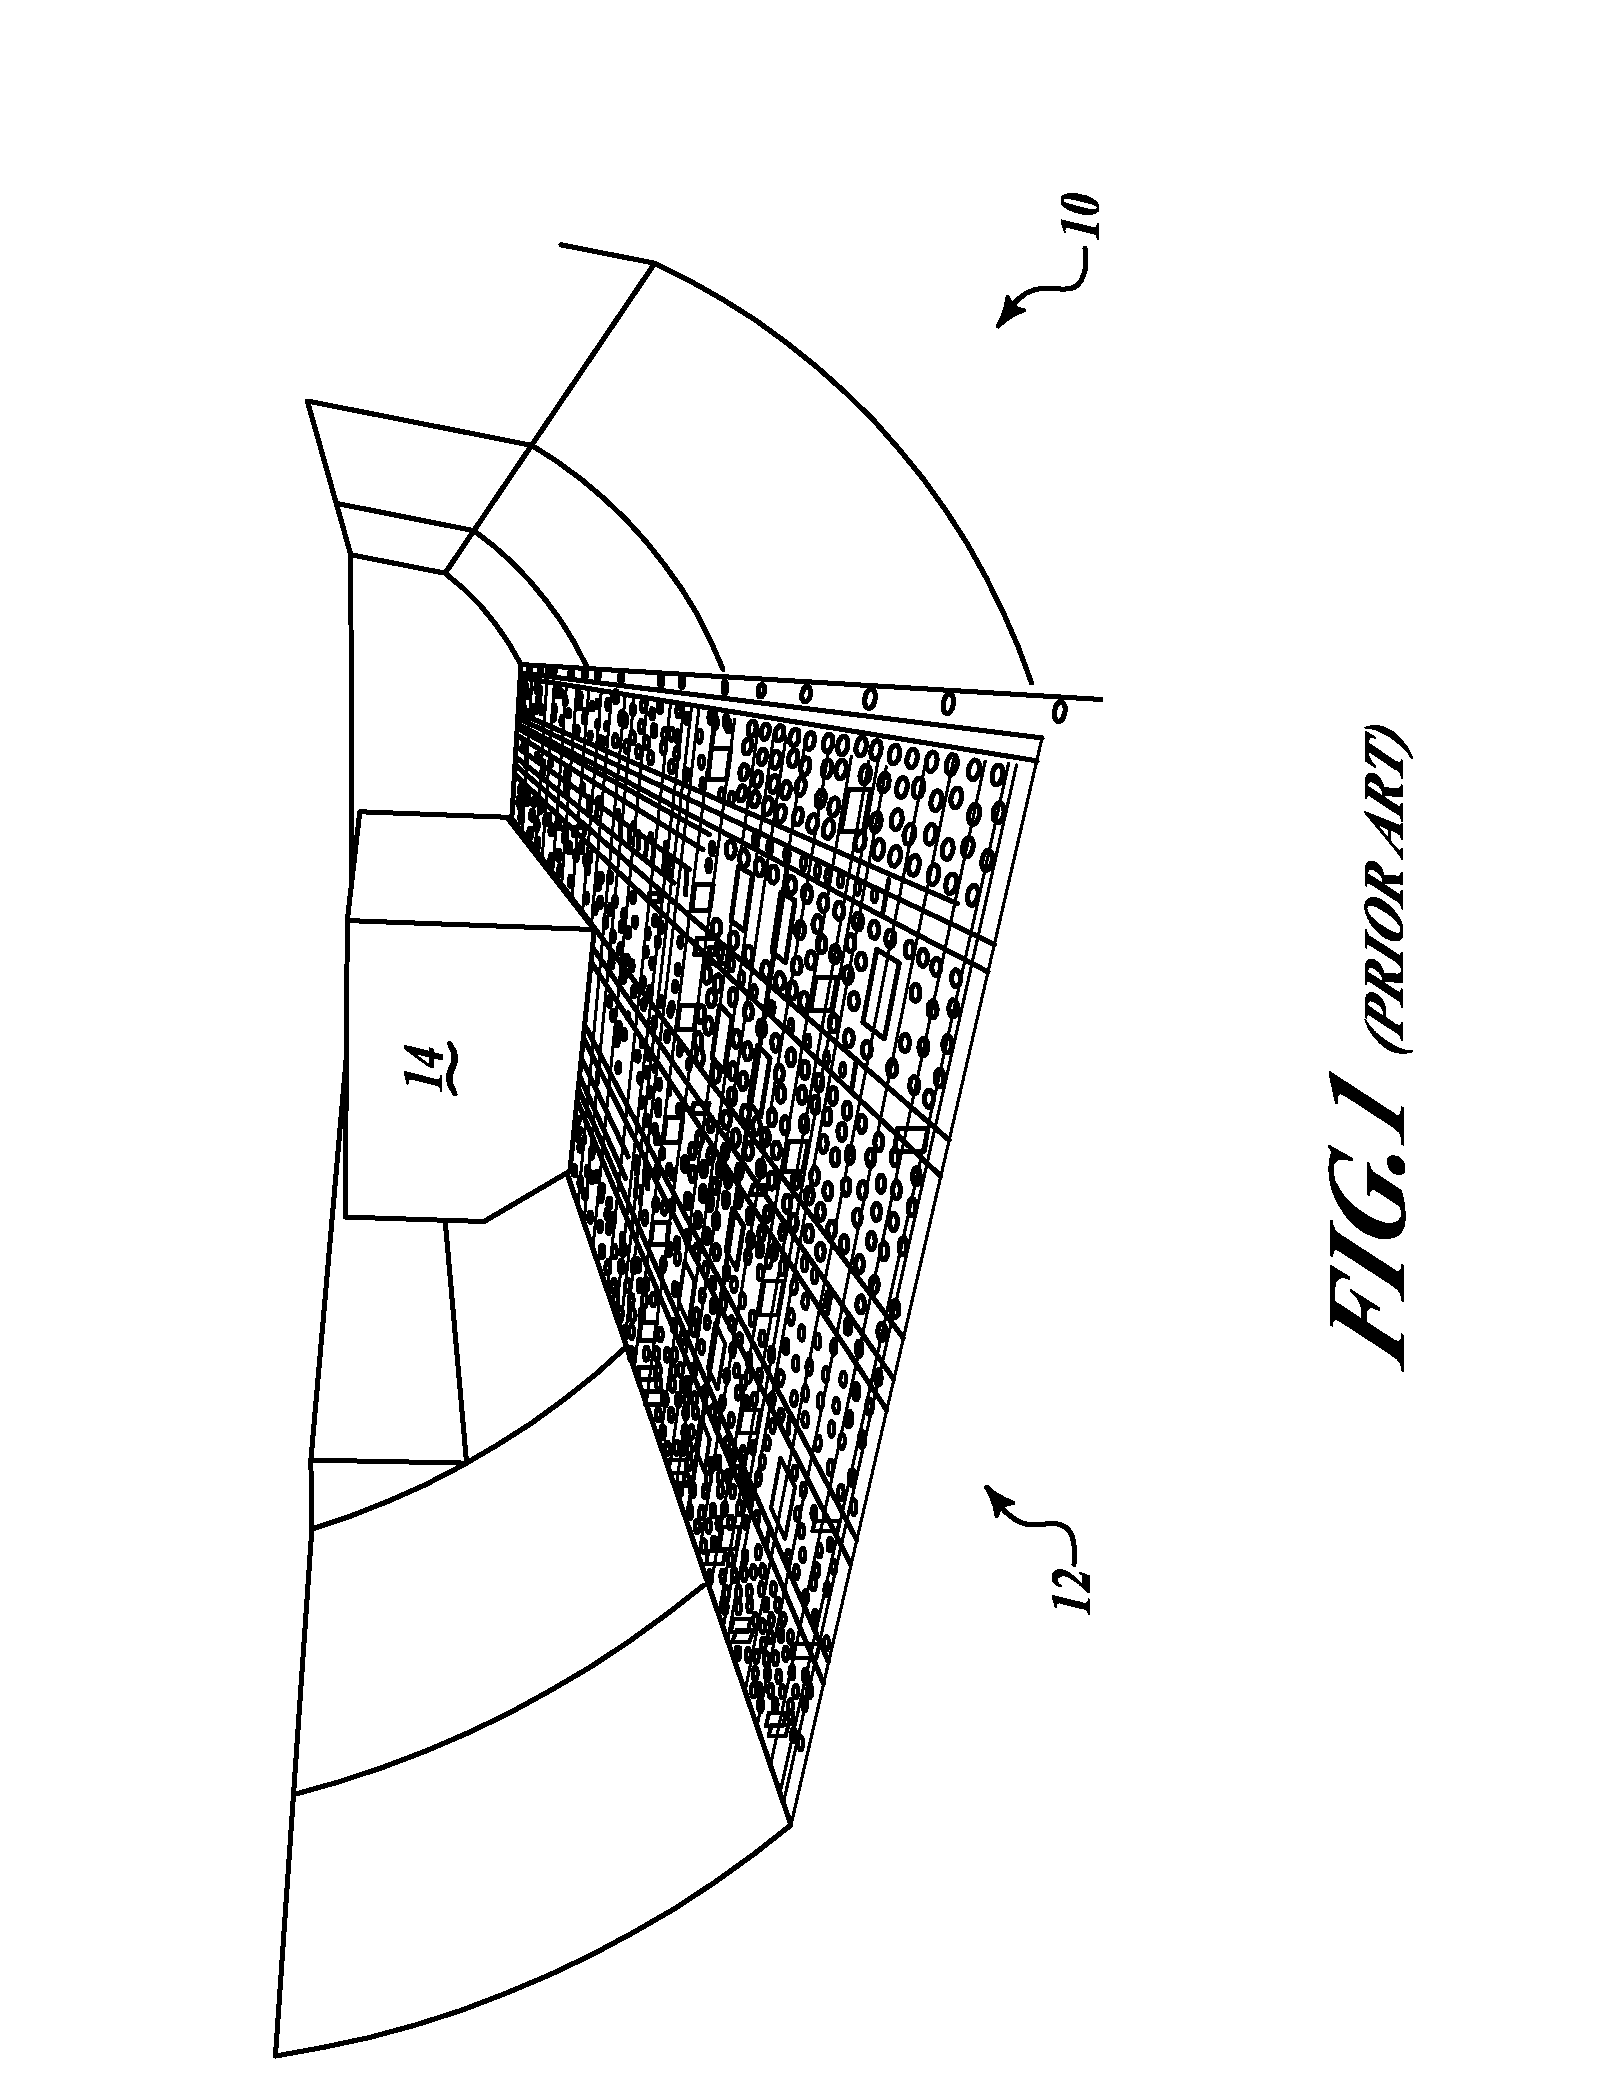 Cargo transport system and method